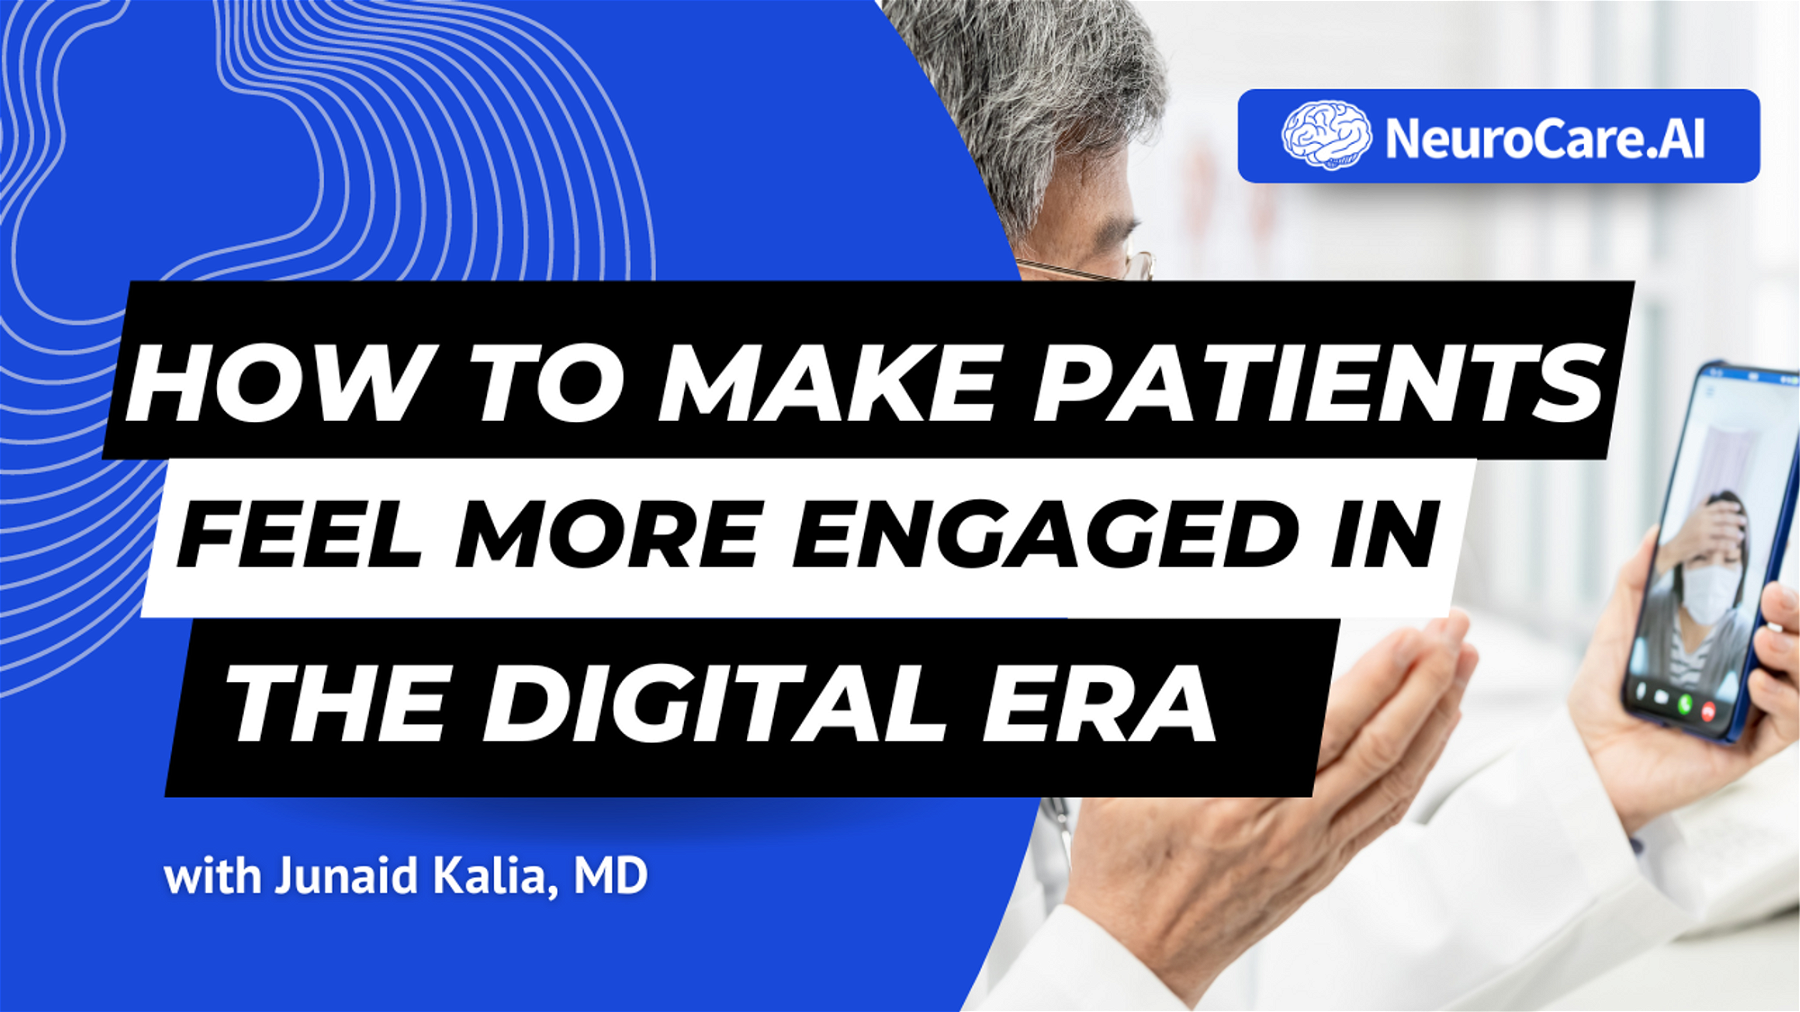 How to make patients feel more engaged in the digital era